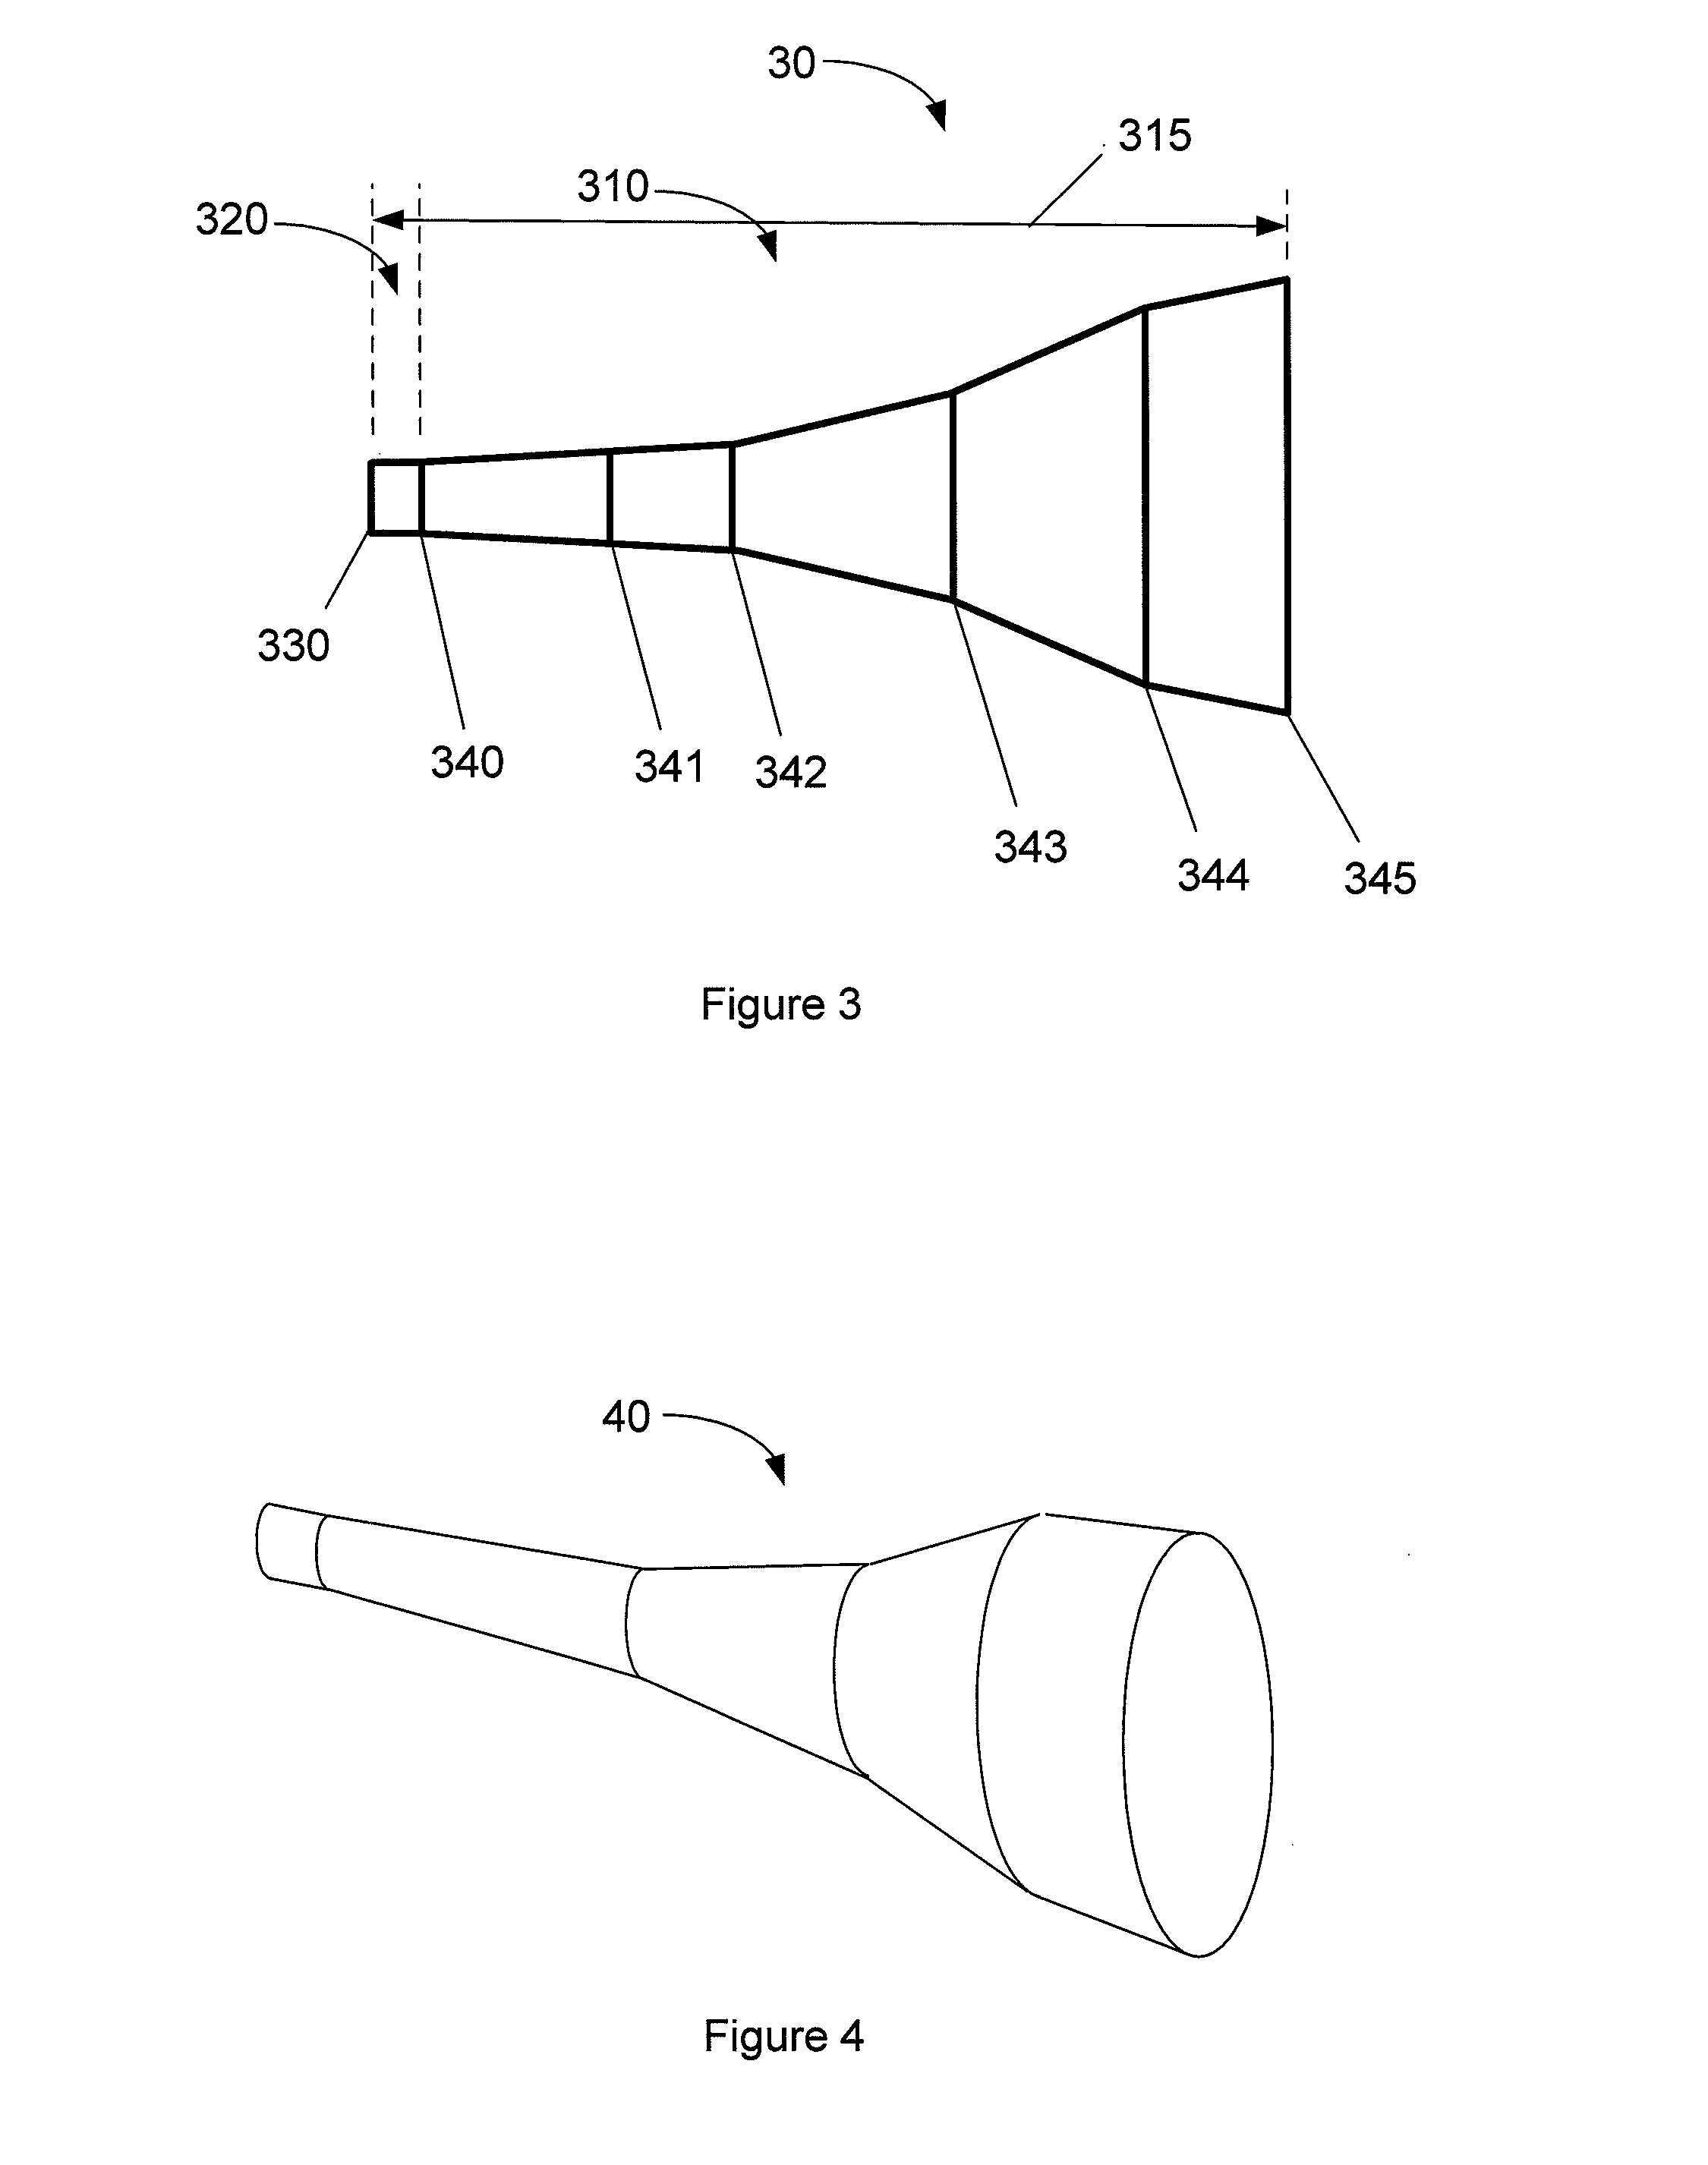 Dual-band antenna using high/low efficiency feed horn for optimal radiation patterns